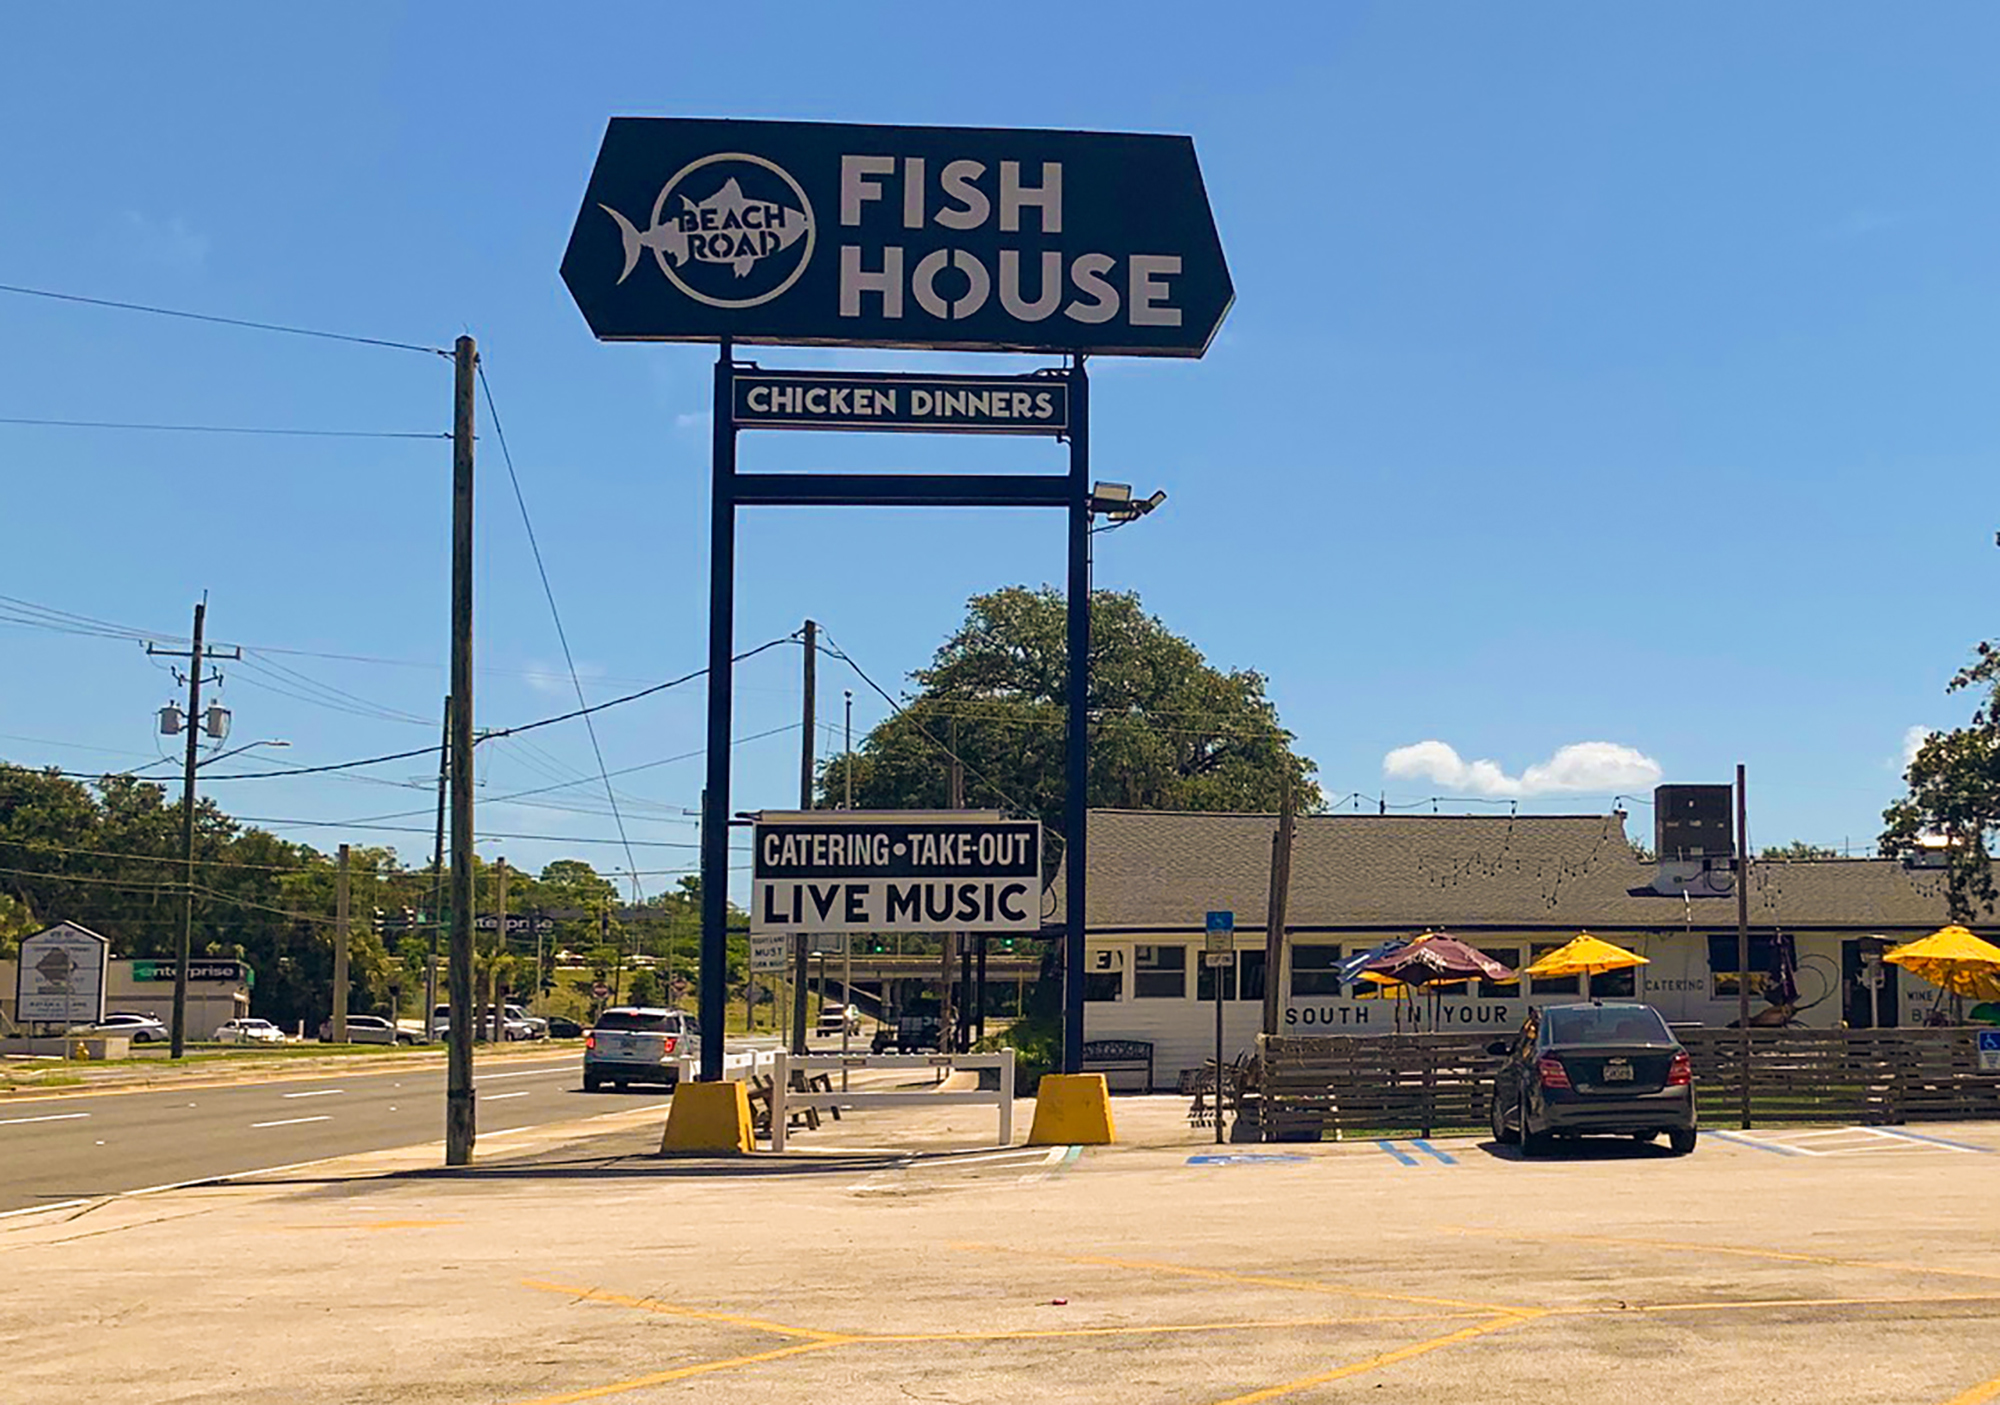 Beach Road Fish House is going away for apartments.